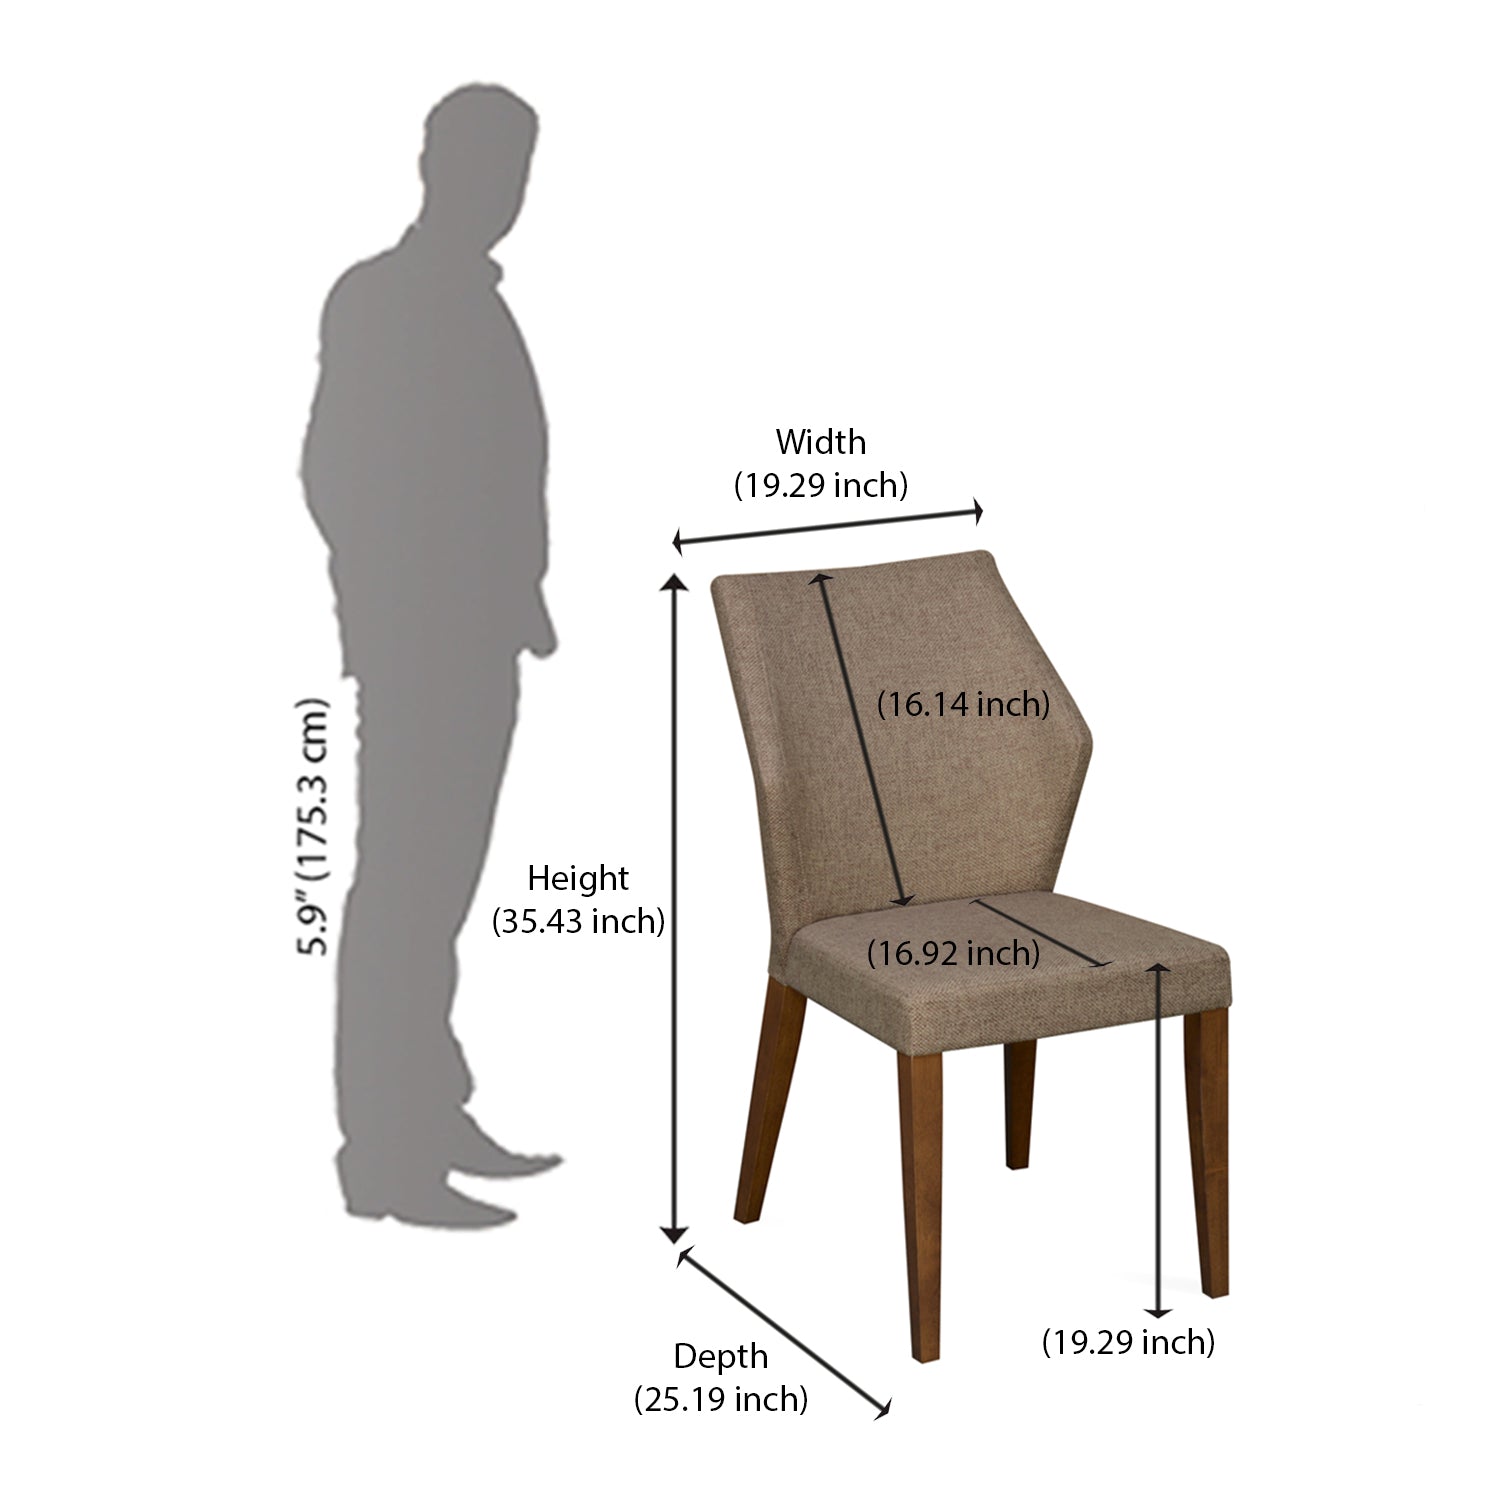 Devin Dining Chair (Brown)